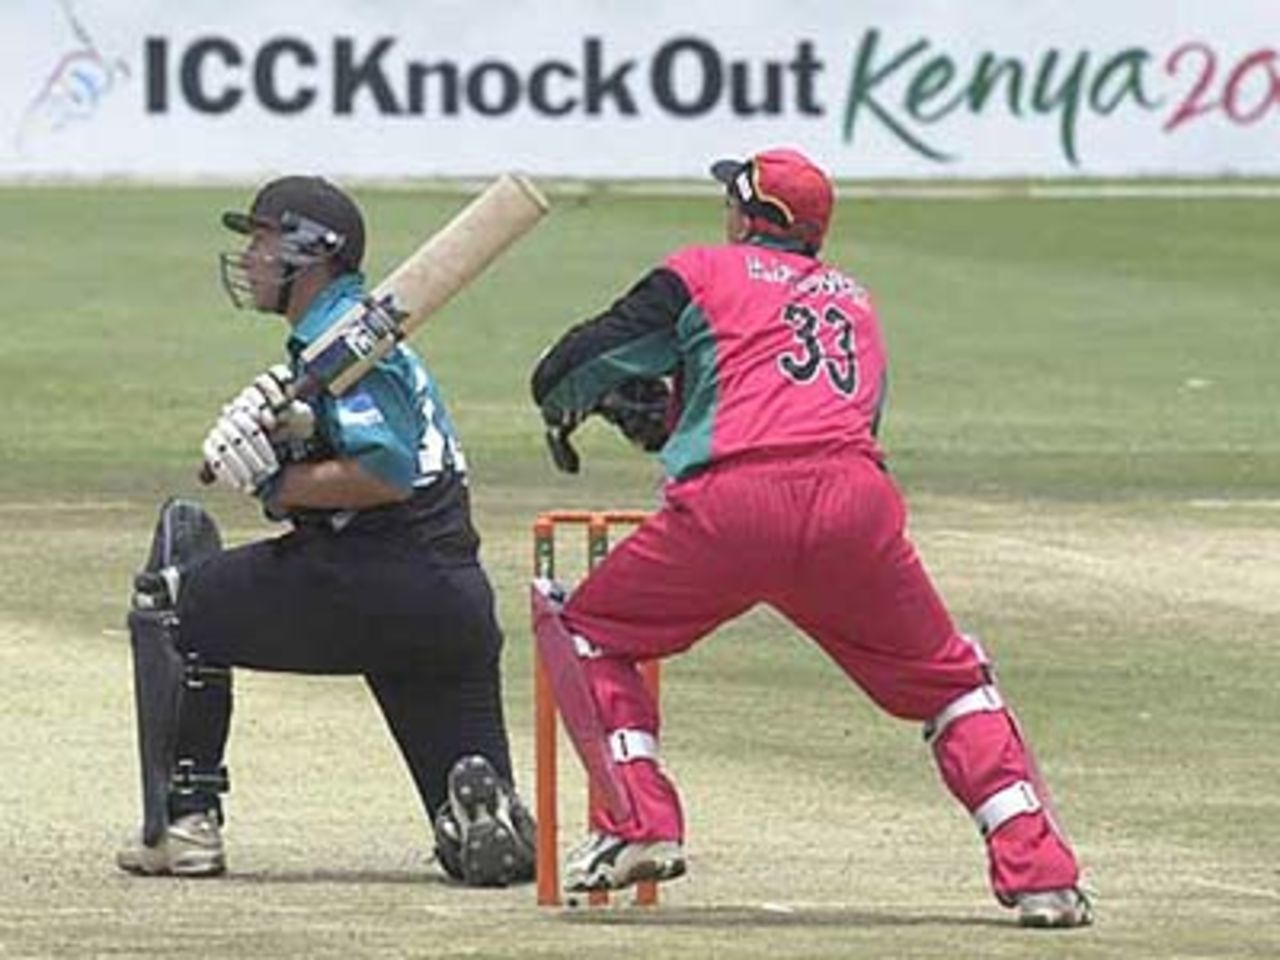 Craig McMillan pulls to square of the wicket, ICC KnockOut, 2000/01, 3rd Quarter Final, New Zealand v Zimbabwe, Gymkhana Club Ground, Nairobi, 09 October 2000.